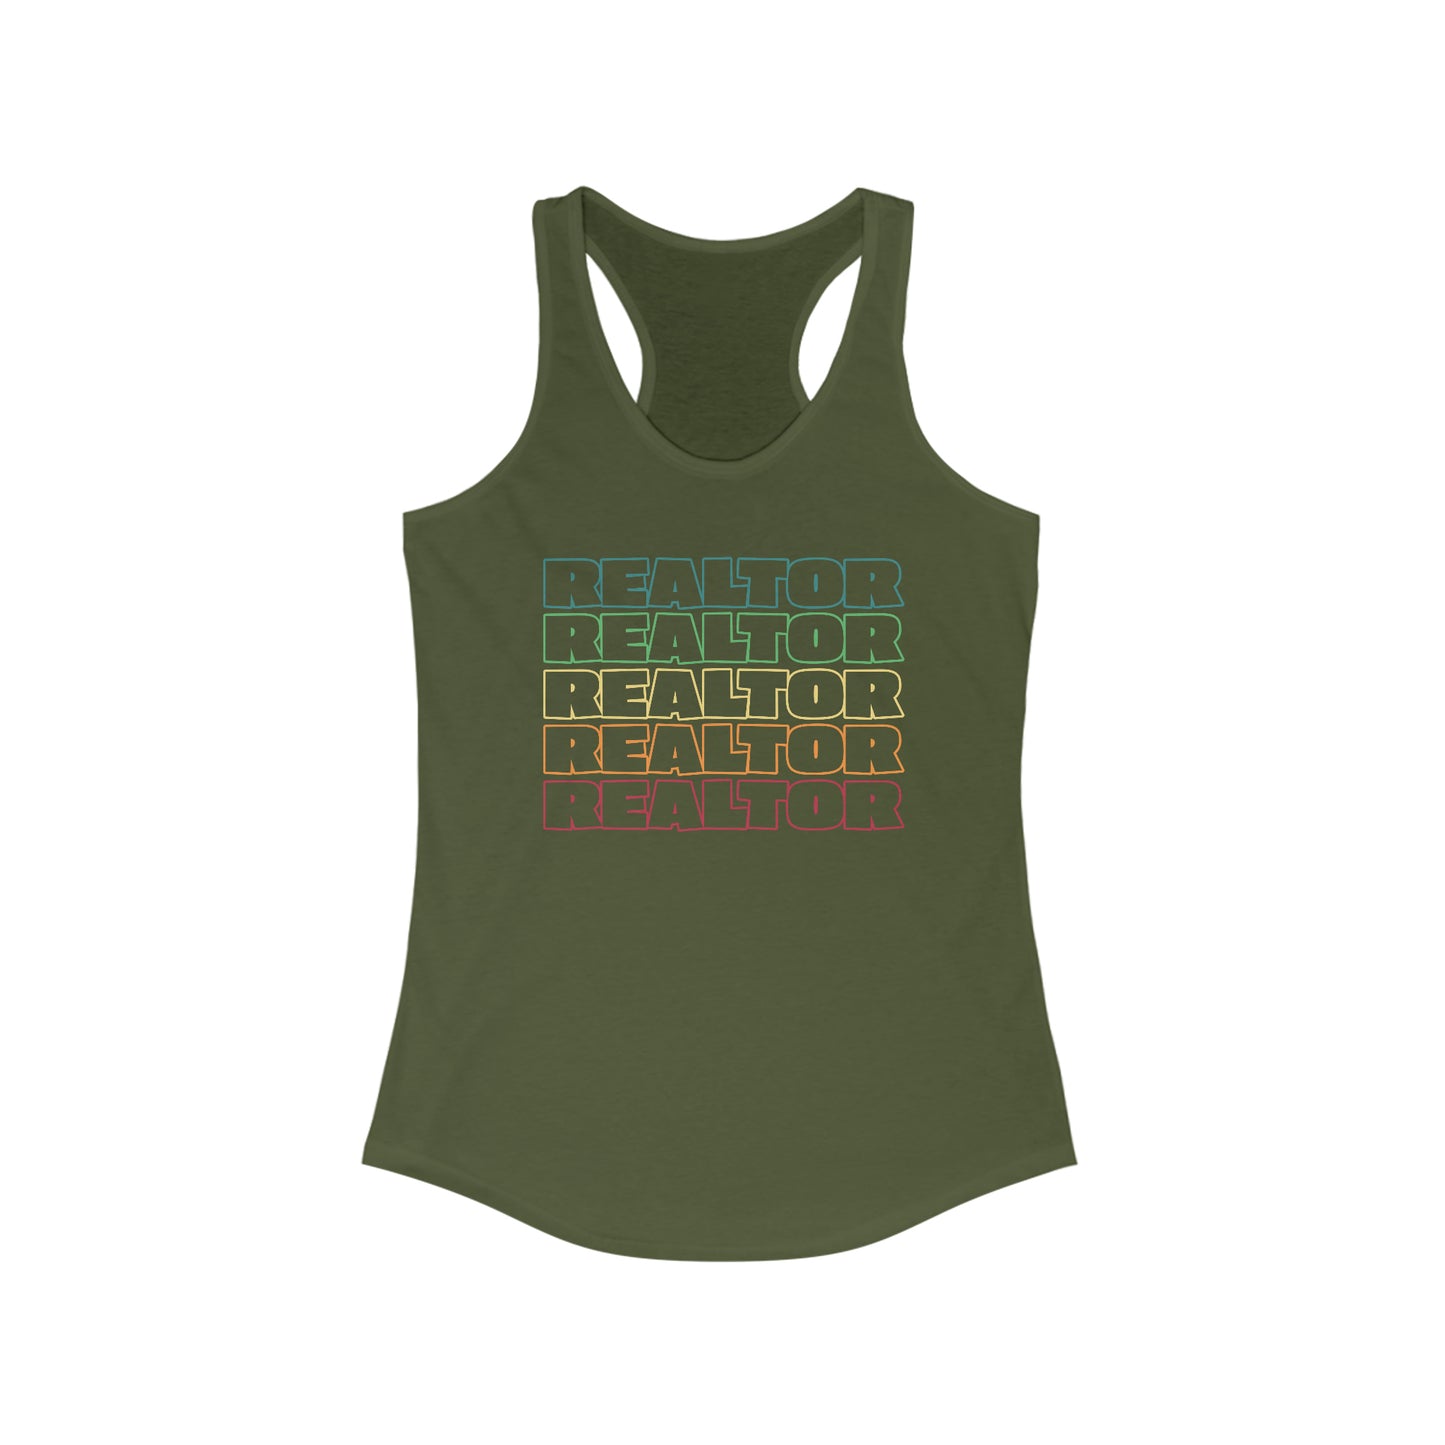 Realtor Tank Top For Real Estate Agent Tank Top For Realty Shirt For Gift For Realtor Cute Real Estate Tank Top For Real Estate Agent Gift